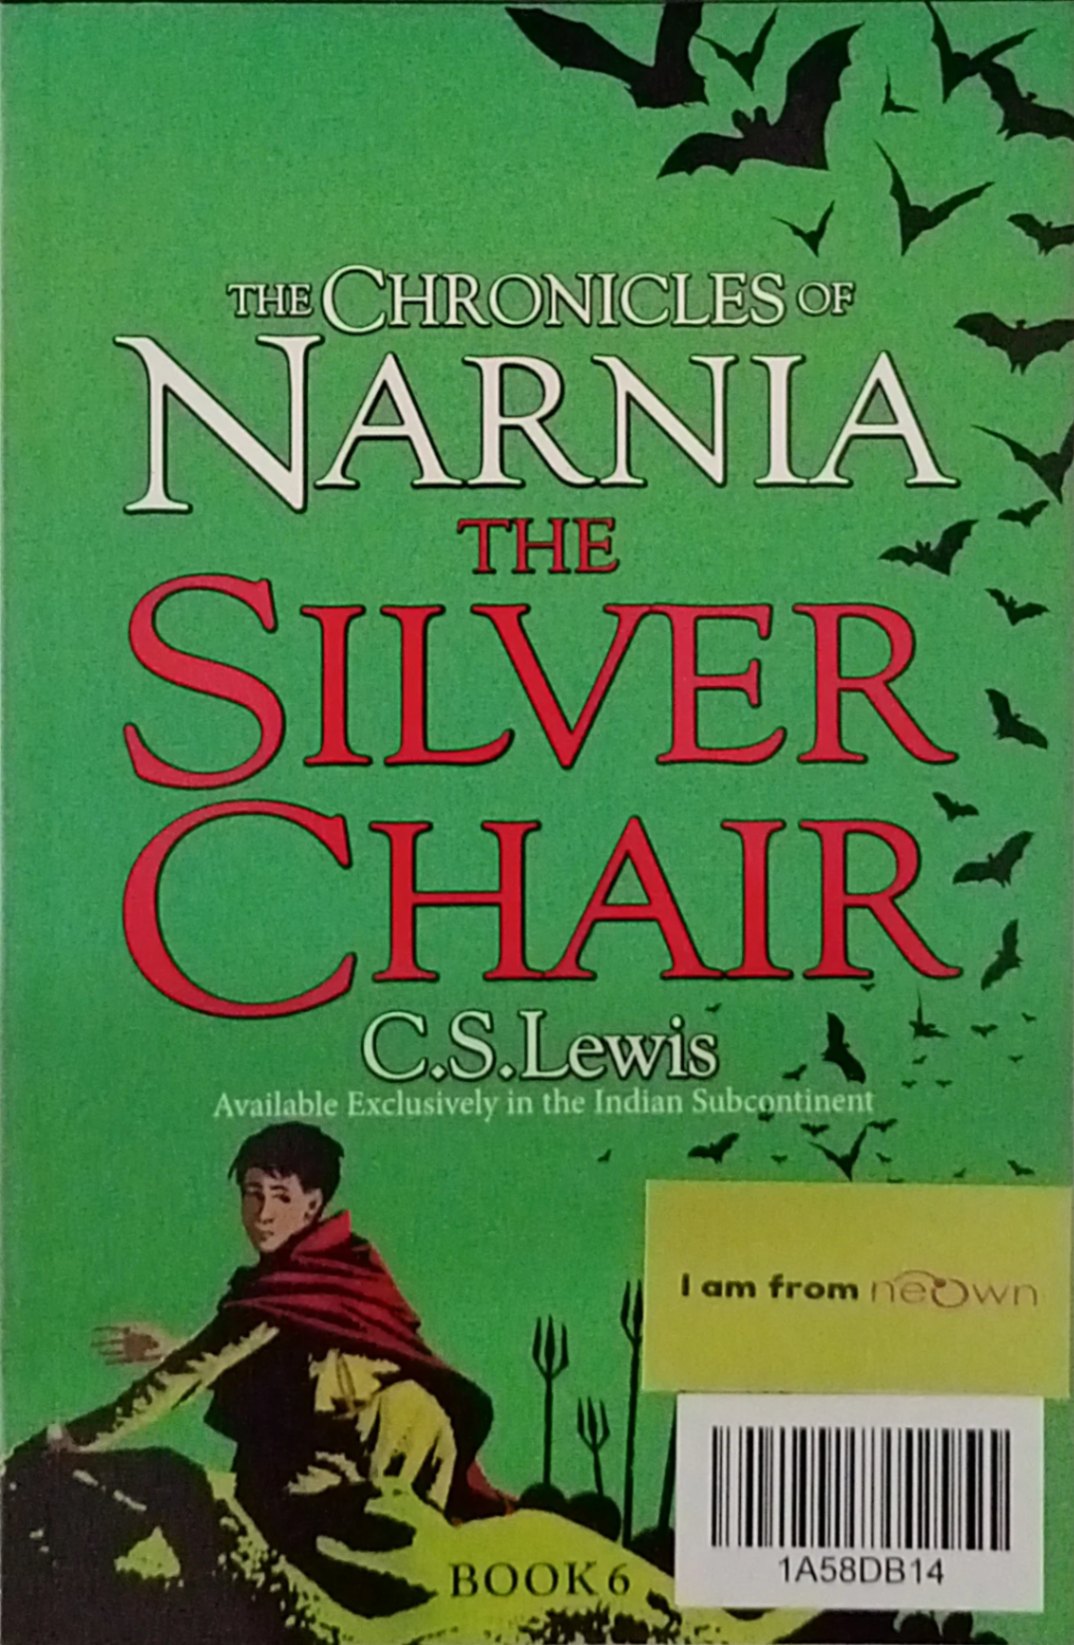 The Chronicles of Narnia - The Silver Chair